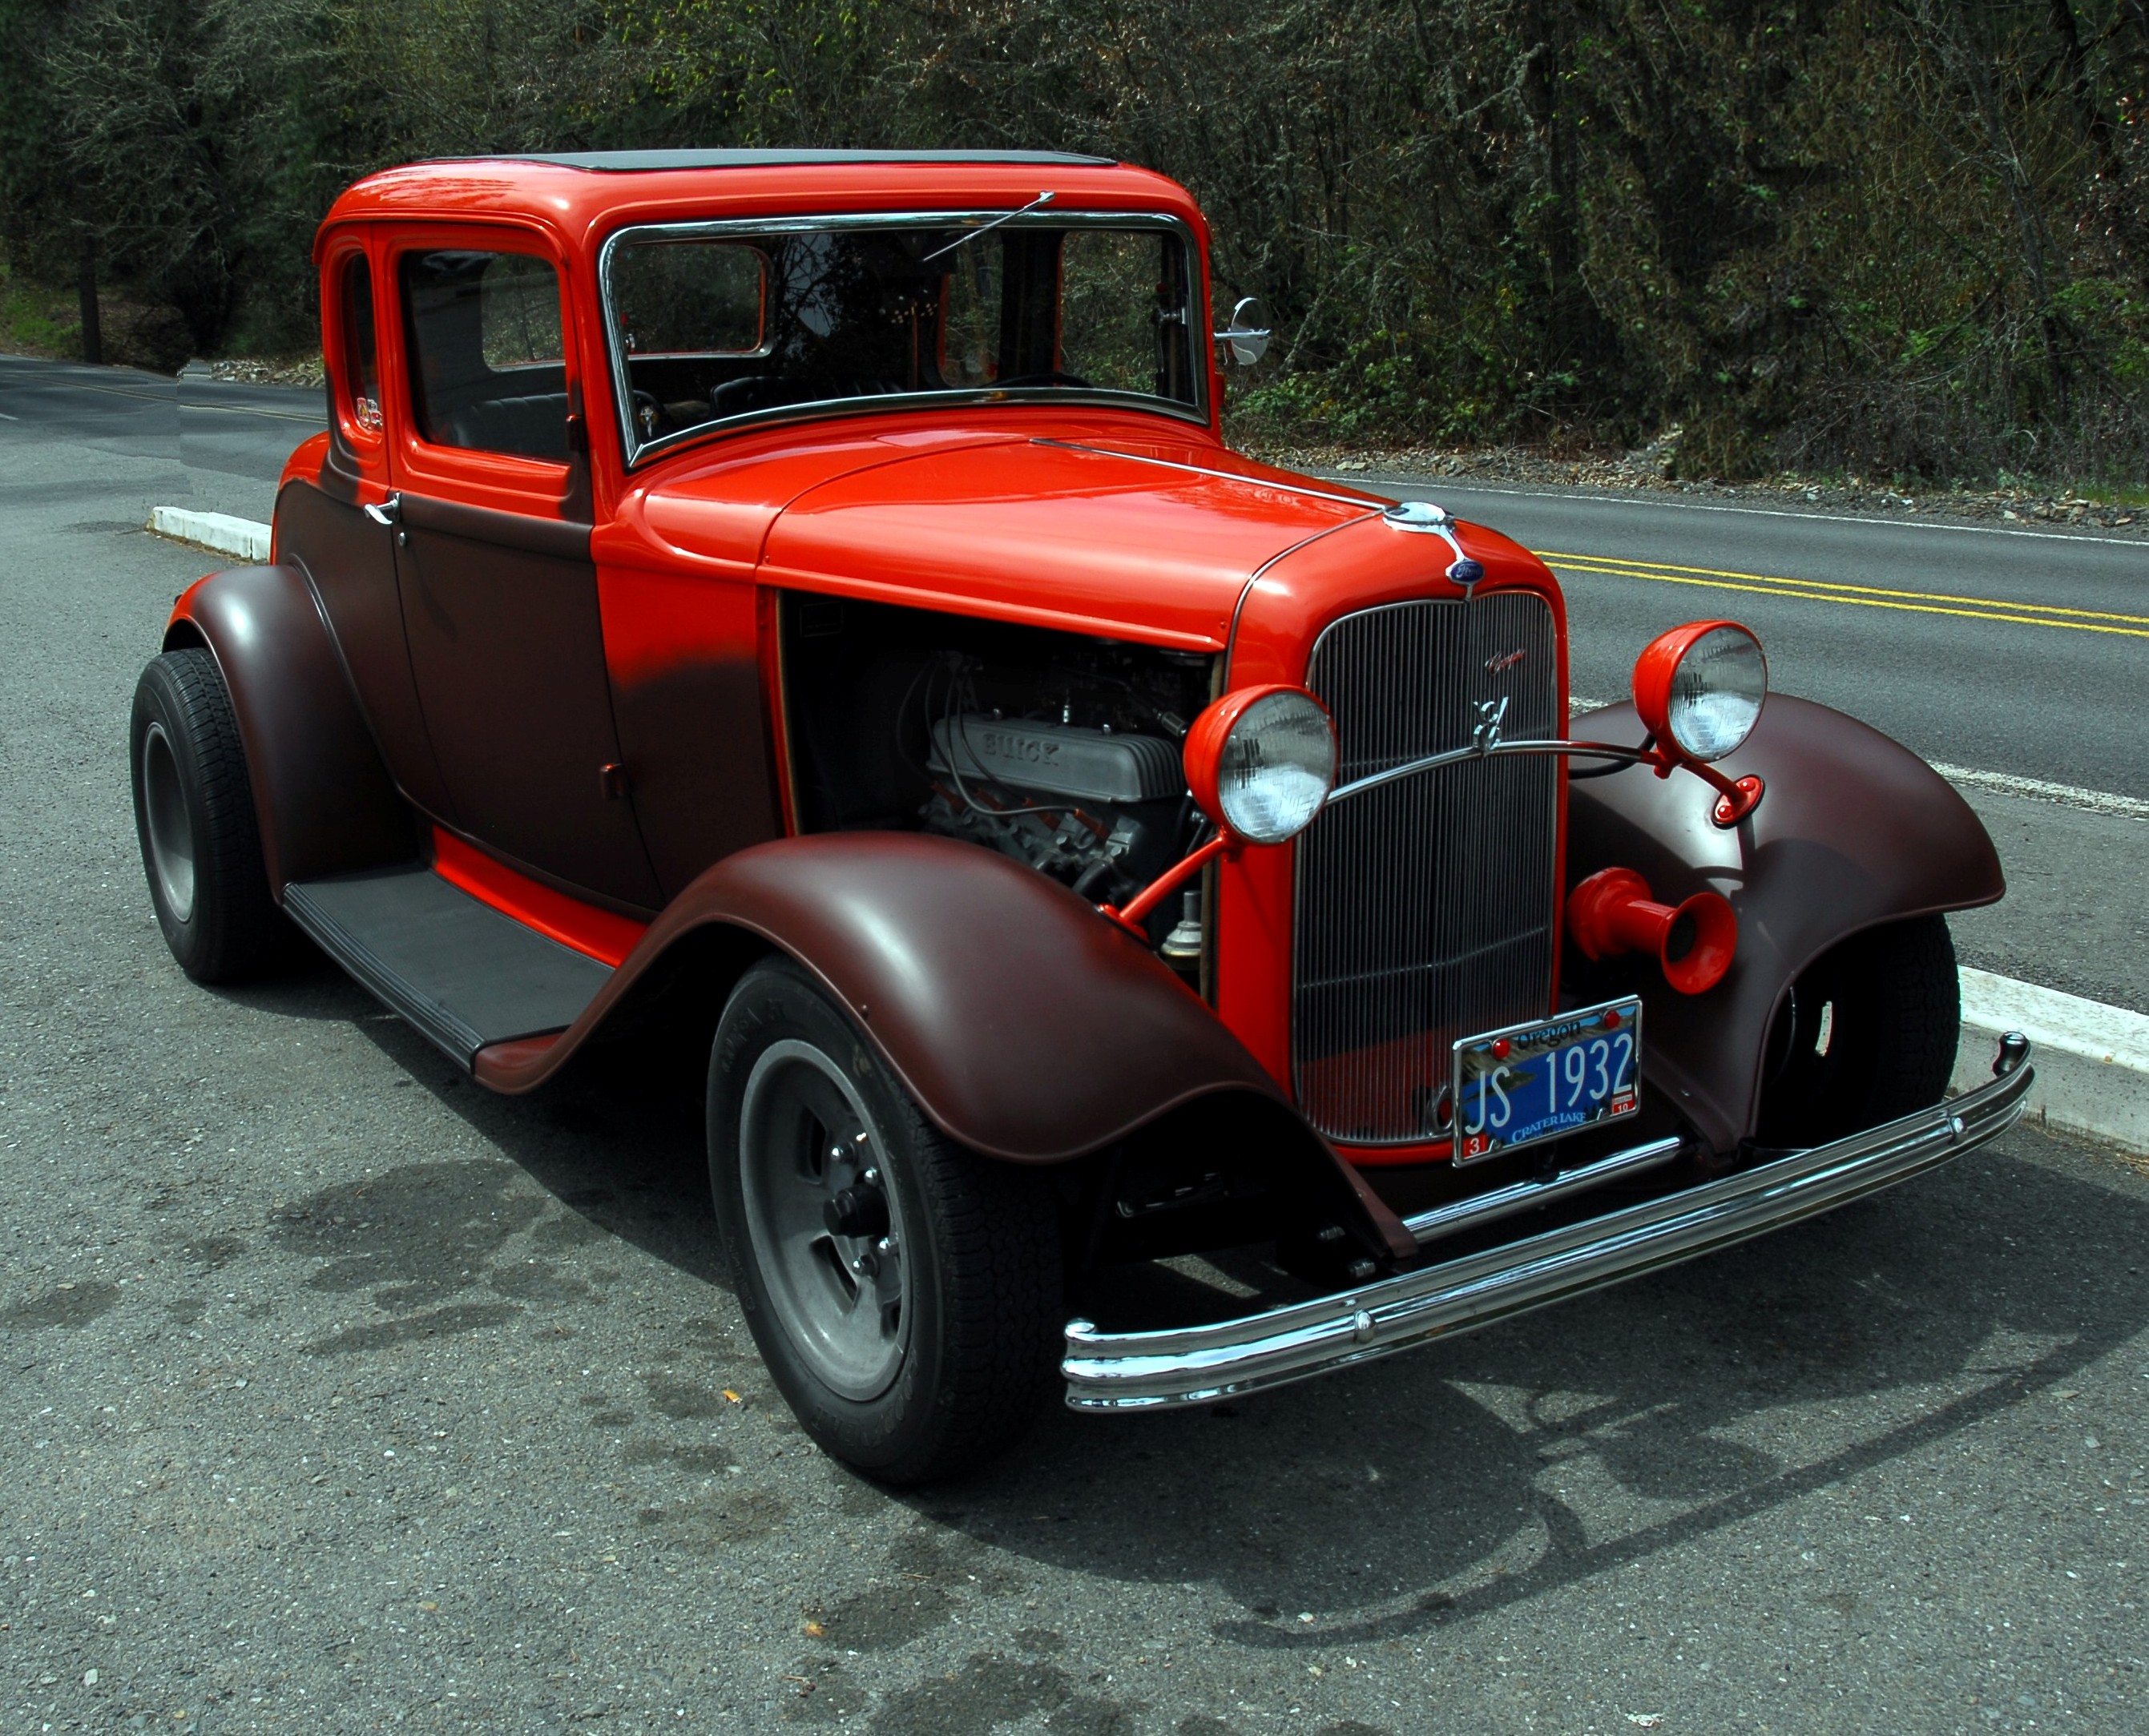 John's Ford Rod | Old Cars Never Die